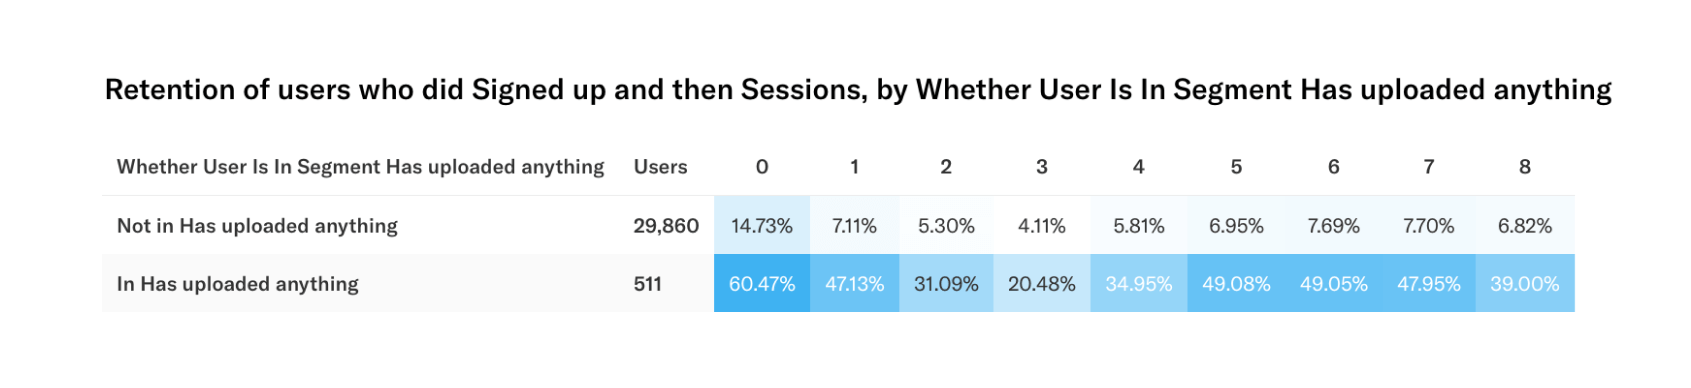 Chart that show the users who have uploaded something and who have not uploaded something.